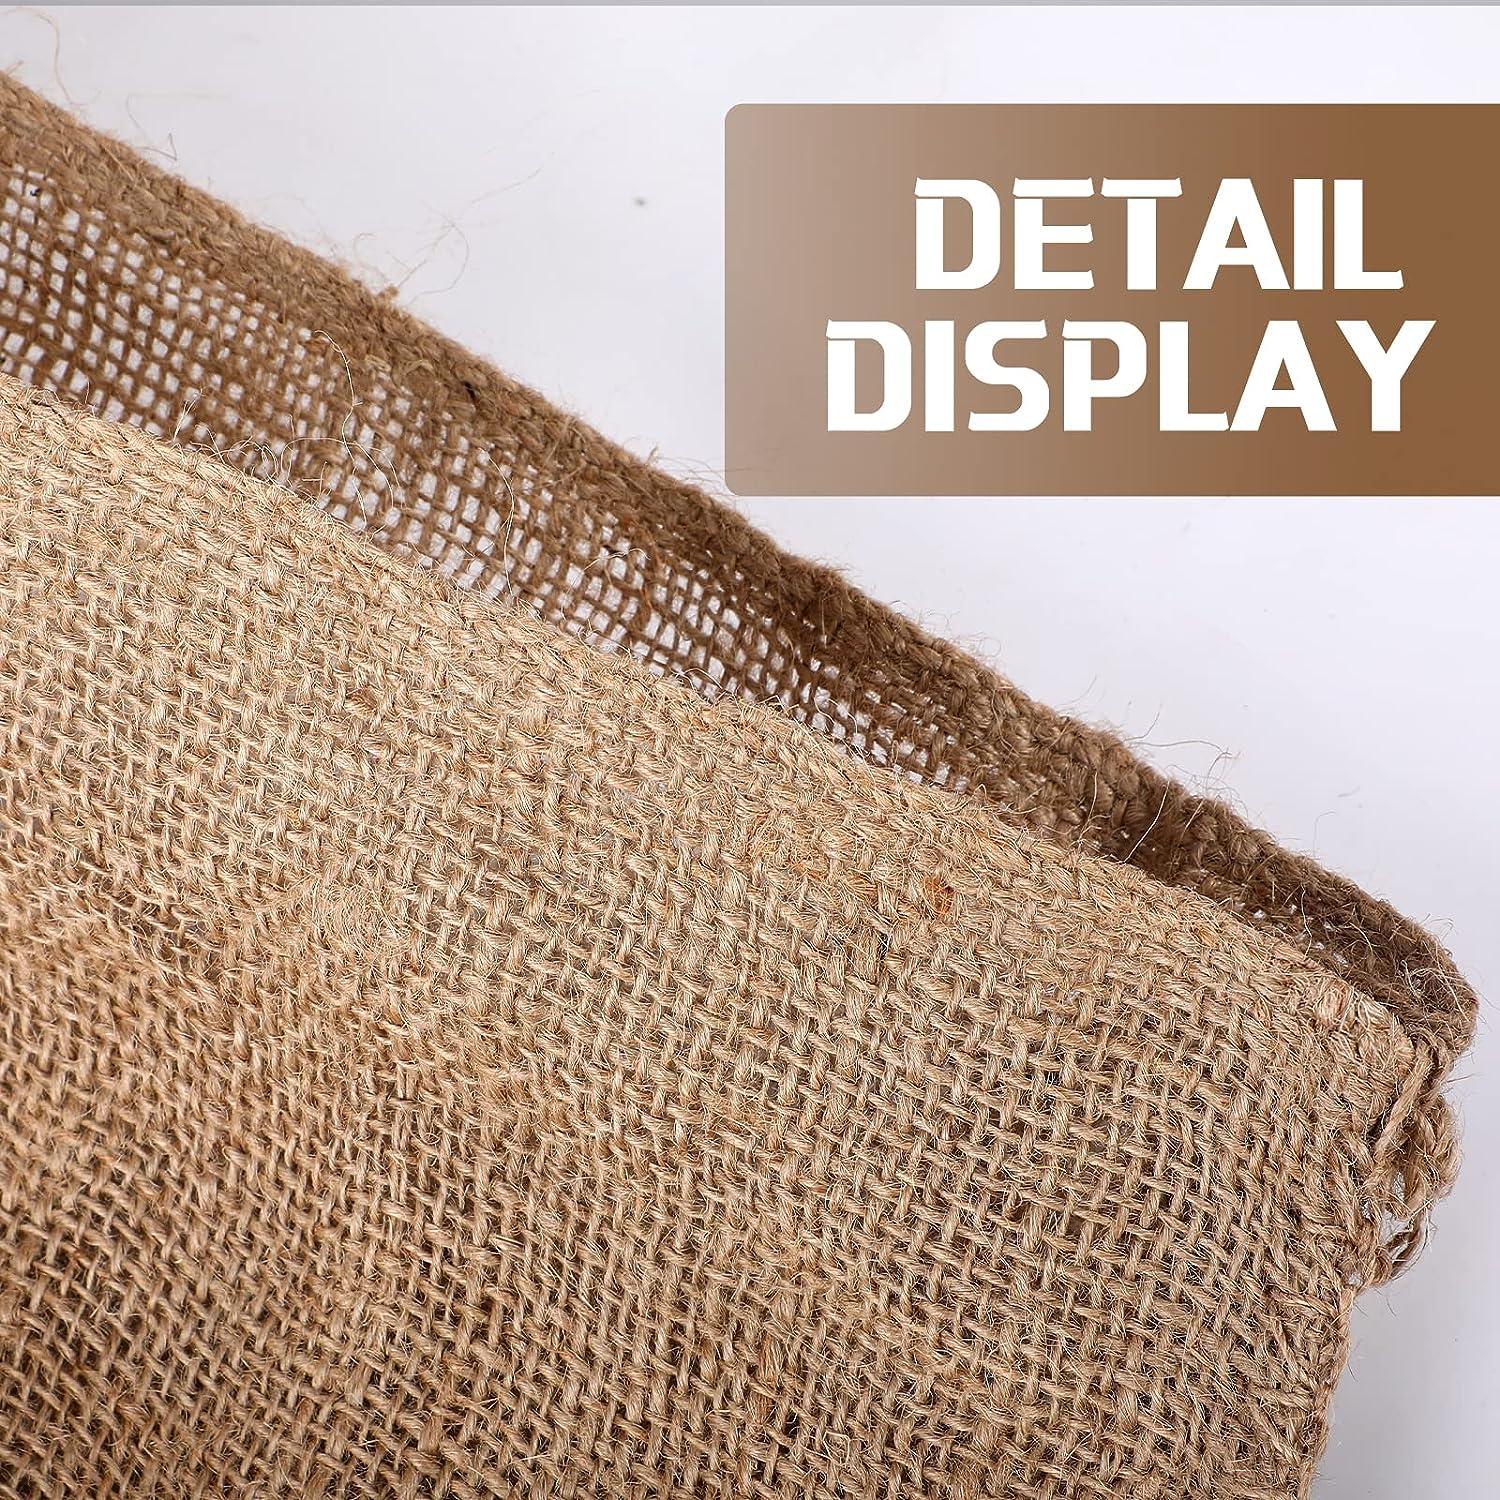 Shappy 10 Pieces Burlap Sand Bag 14 x 26 Empty Sand Bags with Solid Tie  Flood Control Bag Water Barrier Sandbag for Flooding Moving House,Tent  Sandbags, Store Bags